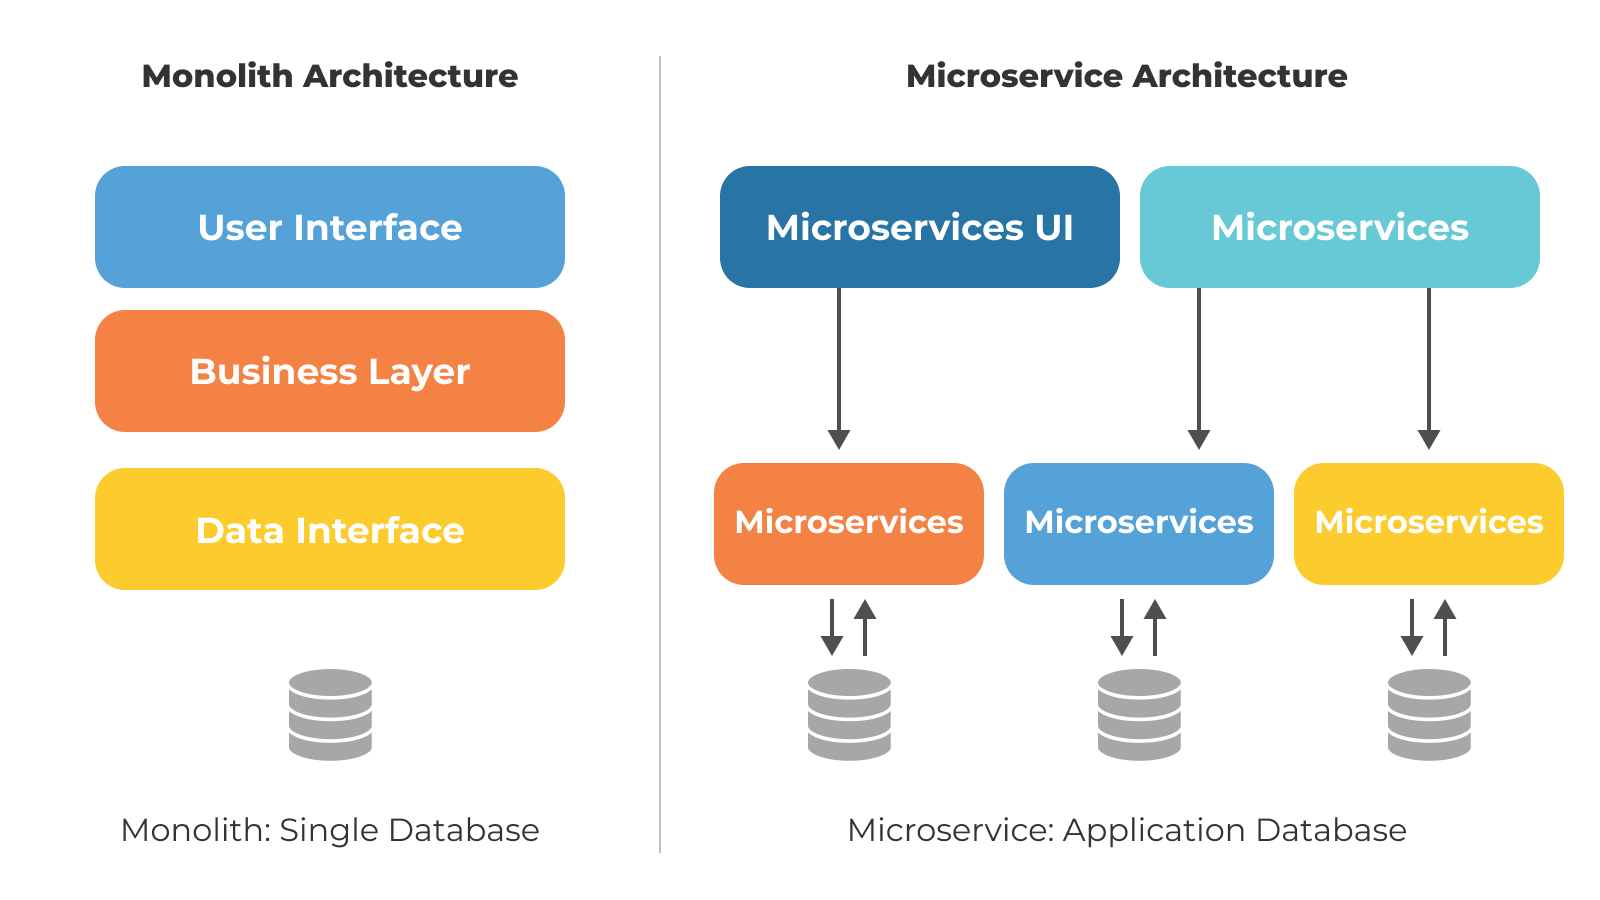 Microservice architecture makes things simple 